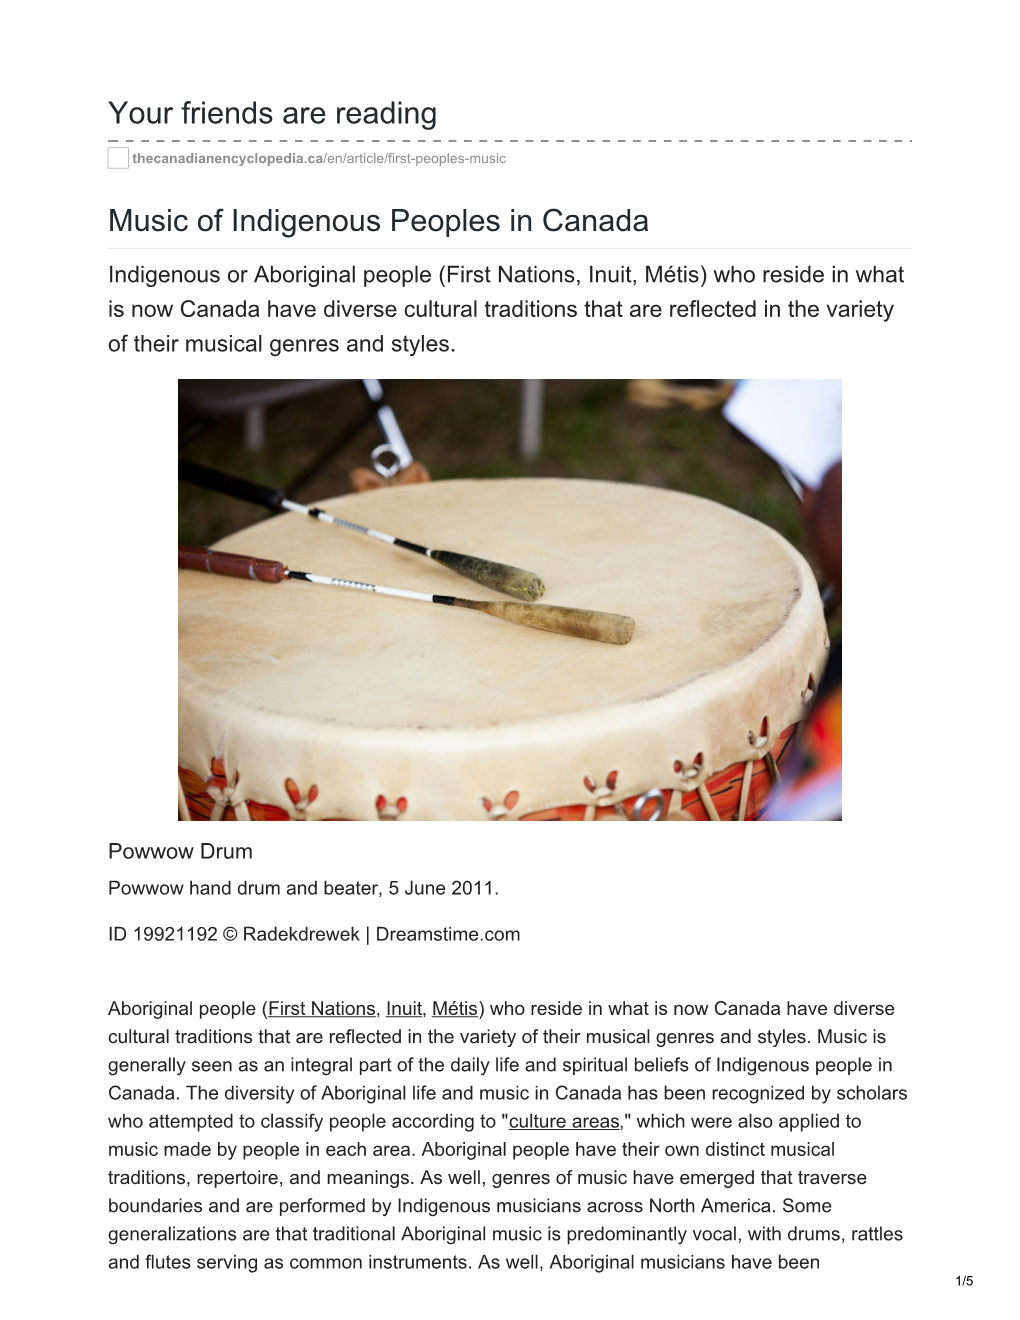 Music of Indigenous Peoples in Canada